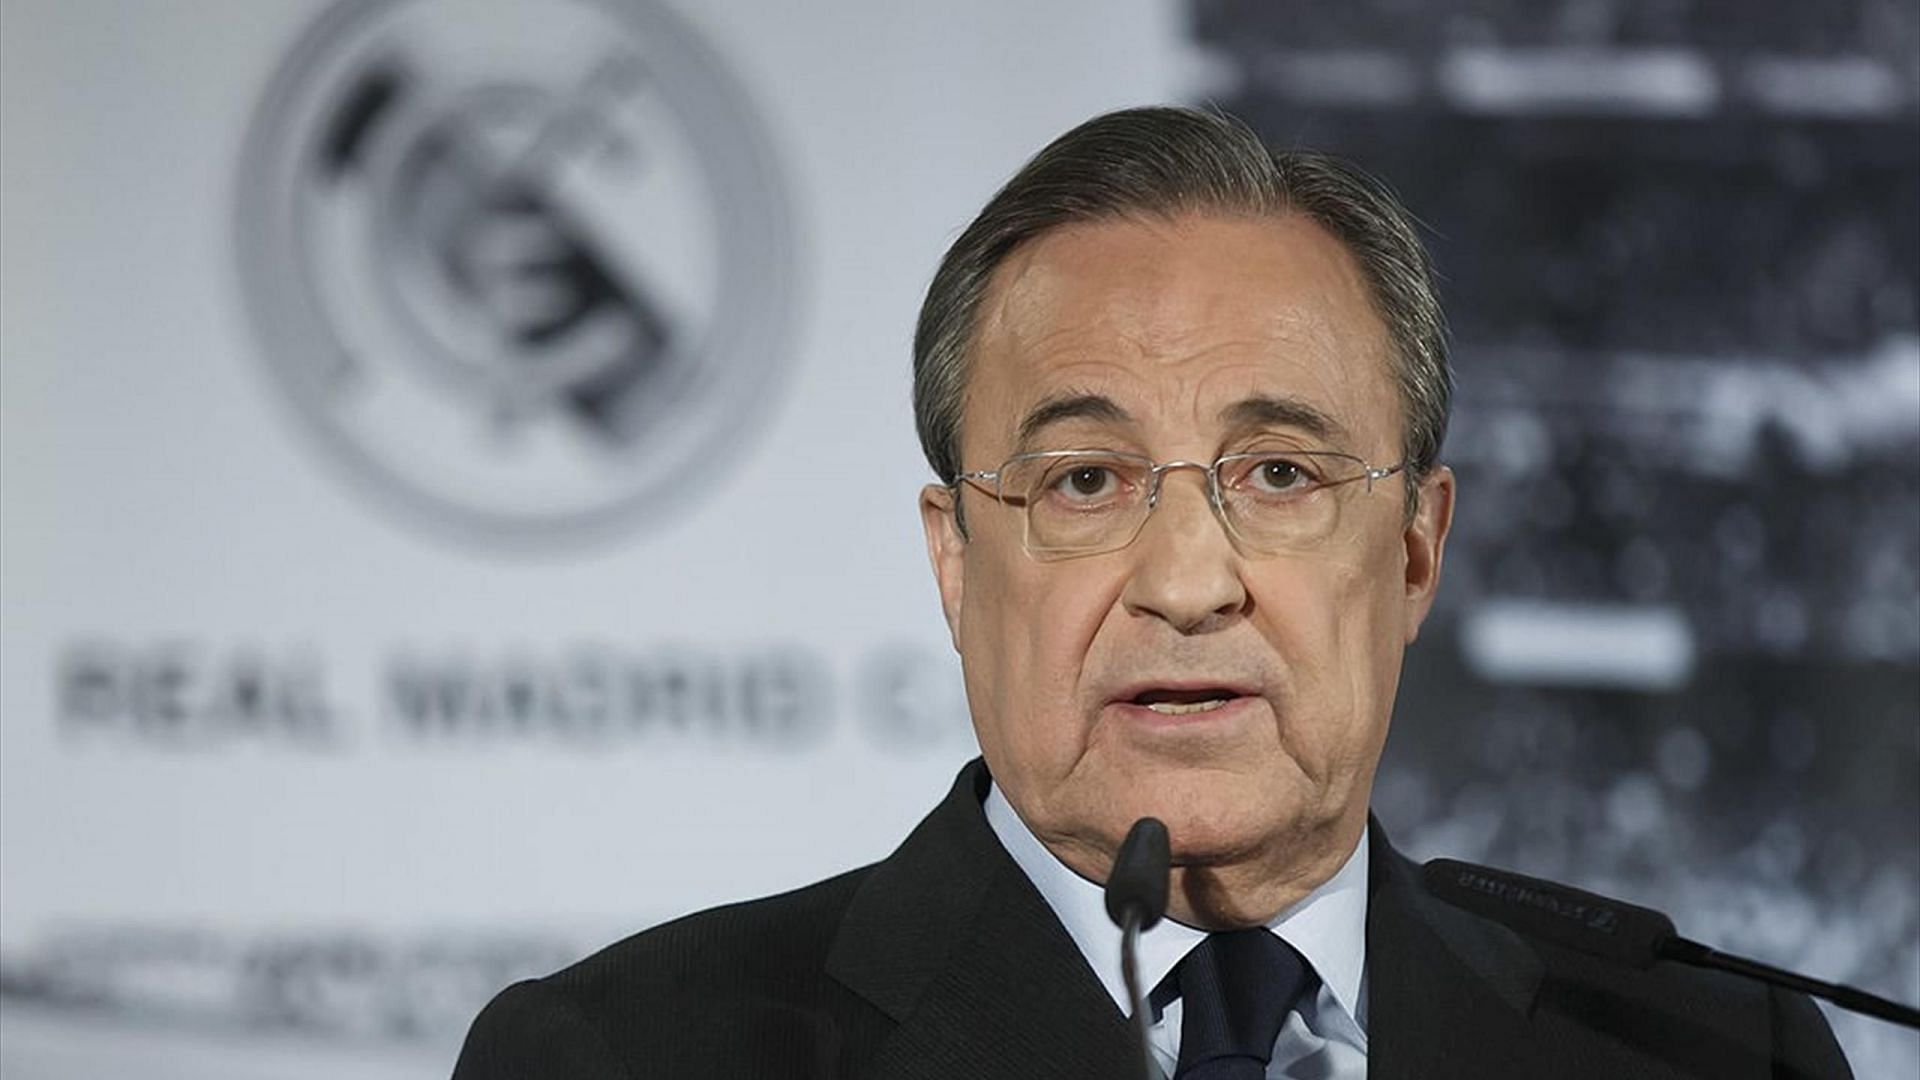 Will we see &#039;Galacticos 2.0&#039; now that Florentino Perez is back as Real Madrid president?